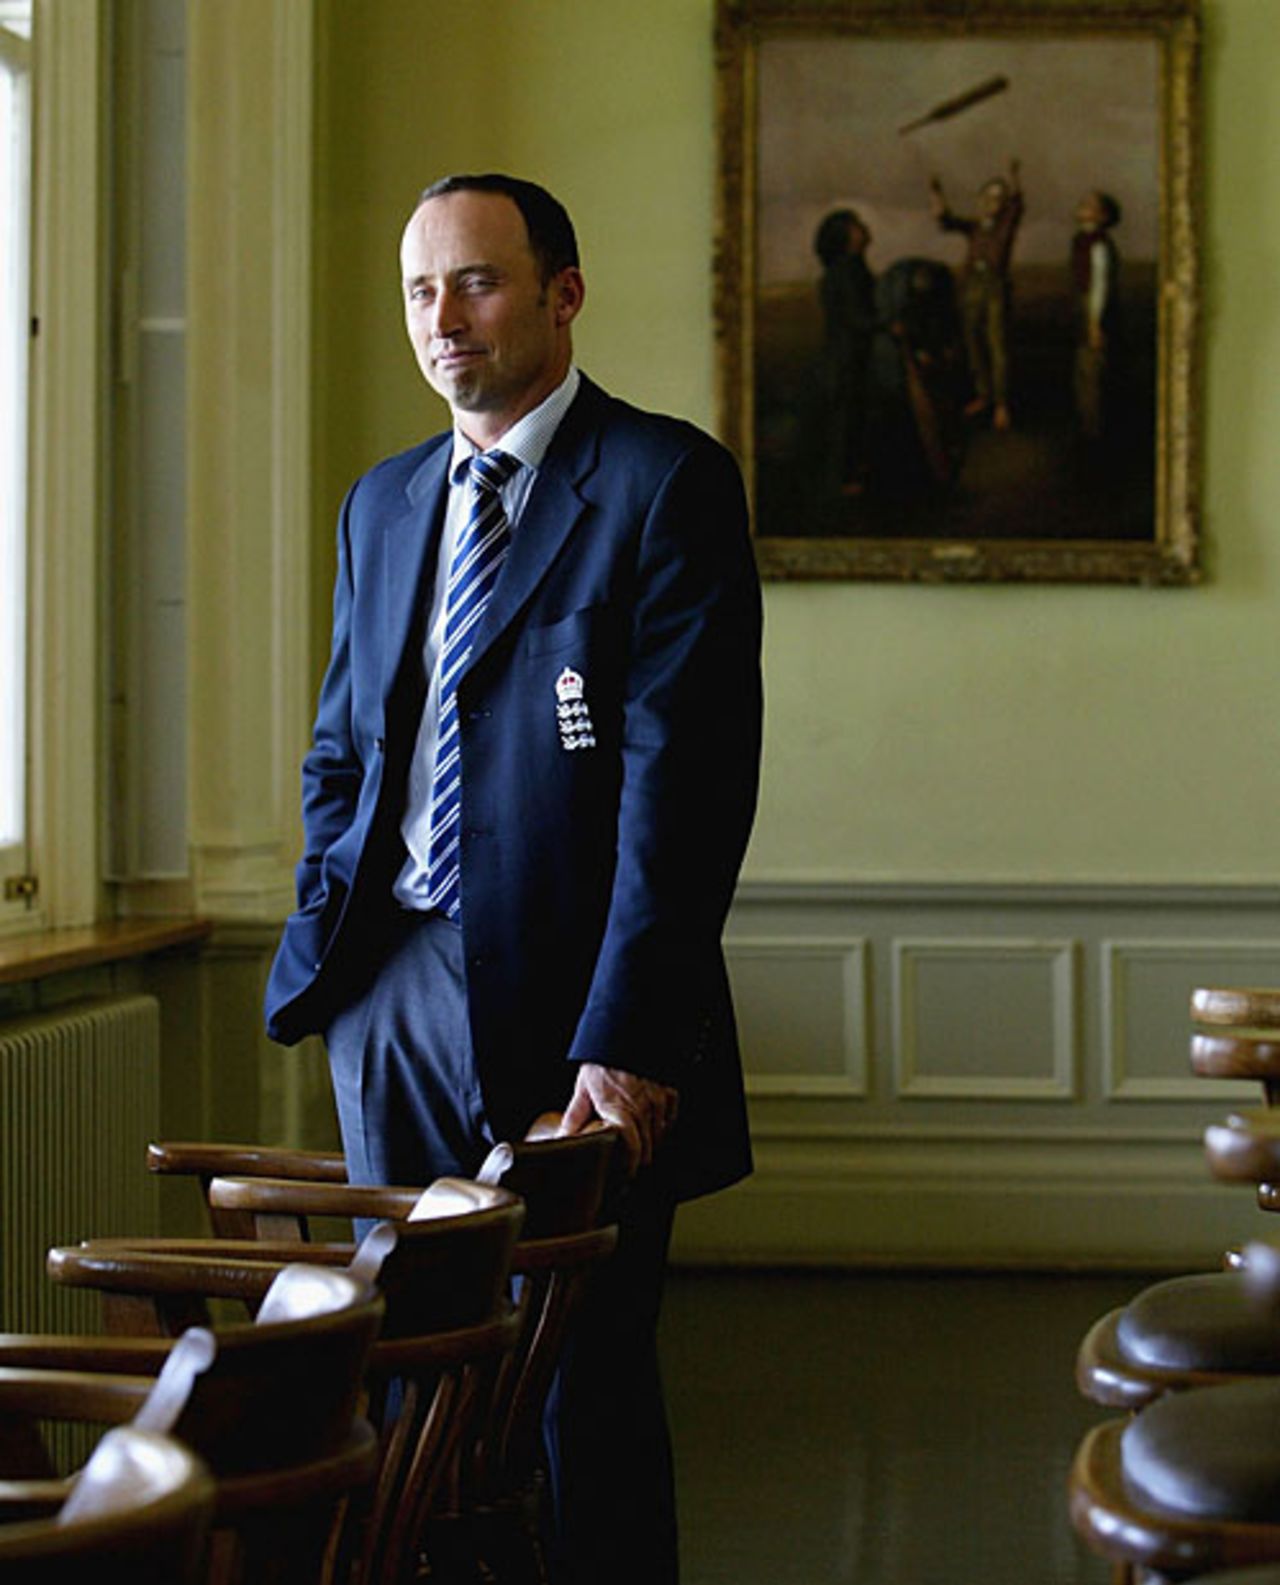 Nasser Hussain at the Long Room, Lord's, May 27, 2004